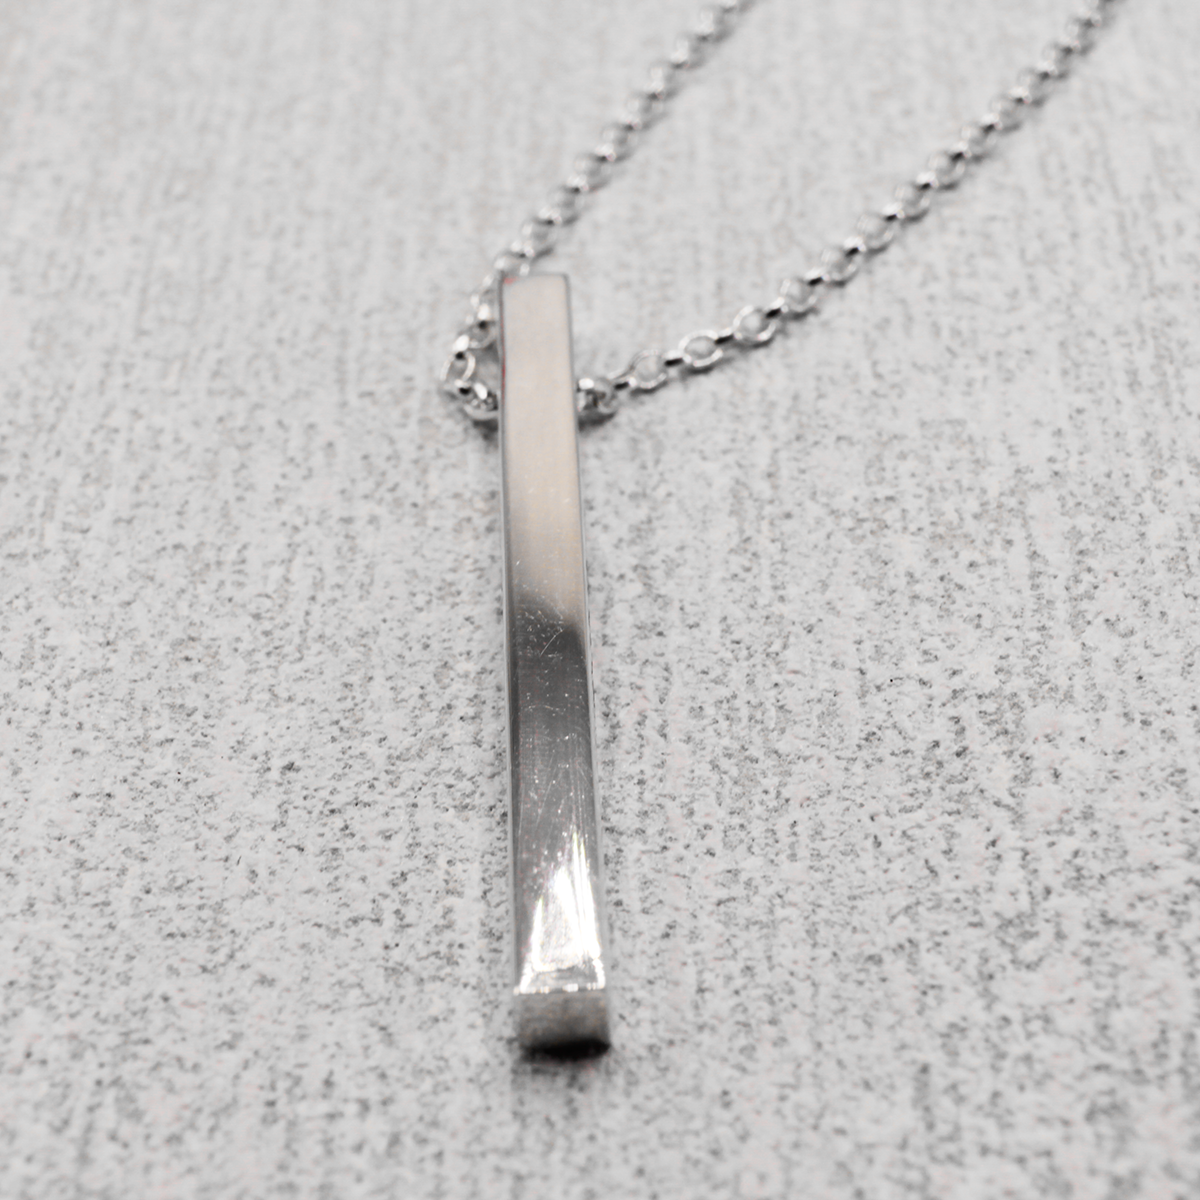 Discover the timeless elegance and captivating beauty of the EIRE - Ogham Grá & Wild Atlantic Way High Polished Bar Silver Pendant. Boasting a 3.5mm width and 40mm length, it's laser engraved with Ogham Grá on one side and the Wild Atlantic Way symbol on the other. Show off your love for the Wild Atlantic Way with its adjustable silver rolo chain stretching from 18" to 20", offering virtually endless styling possibilities!